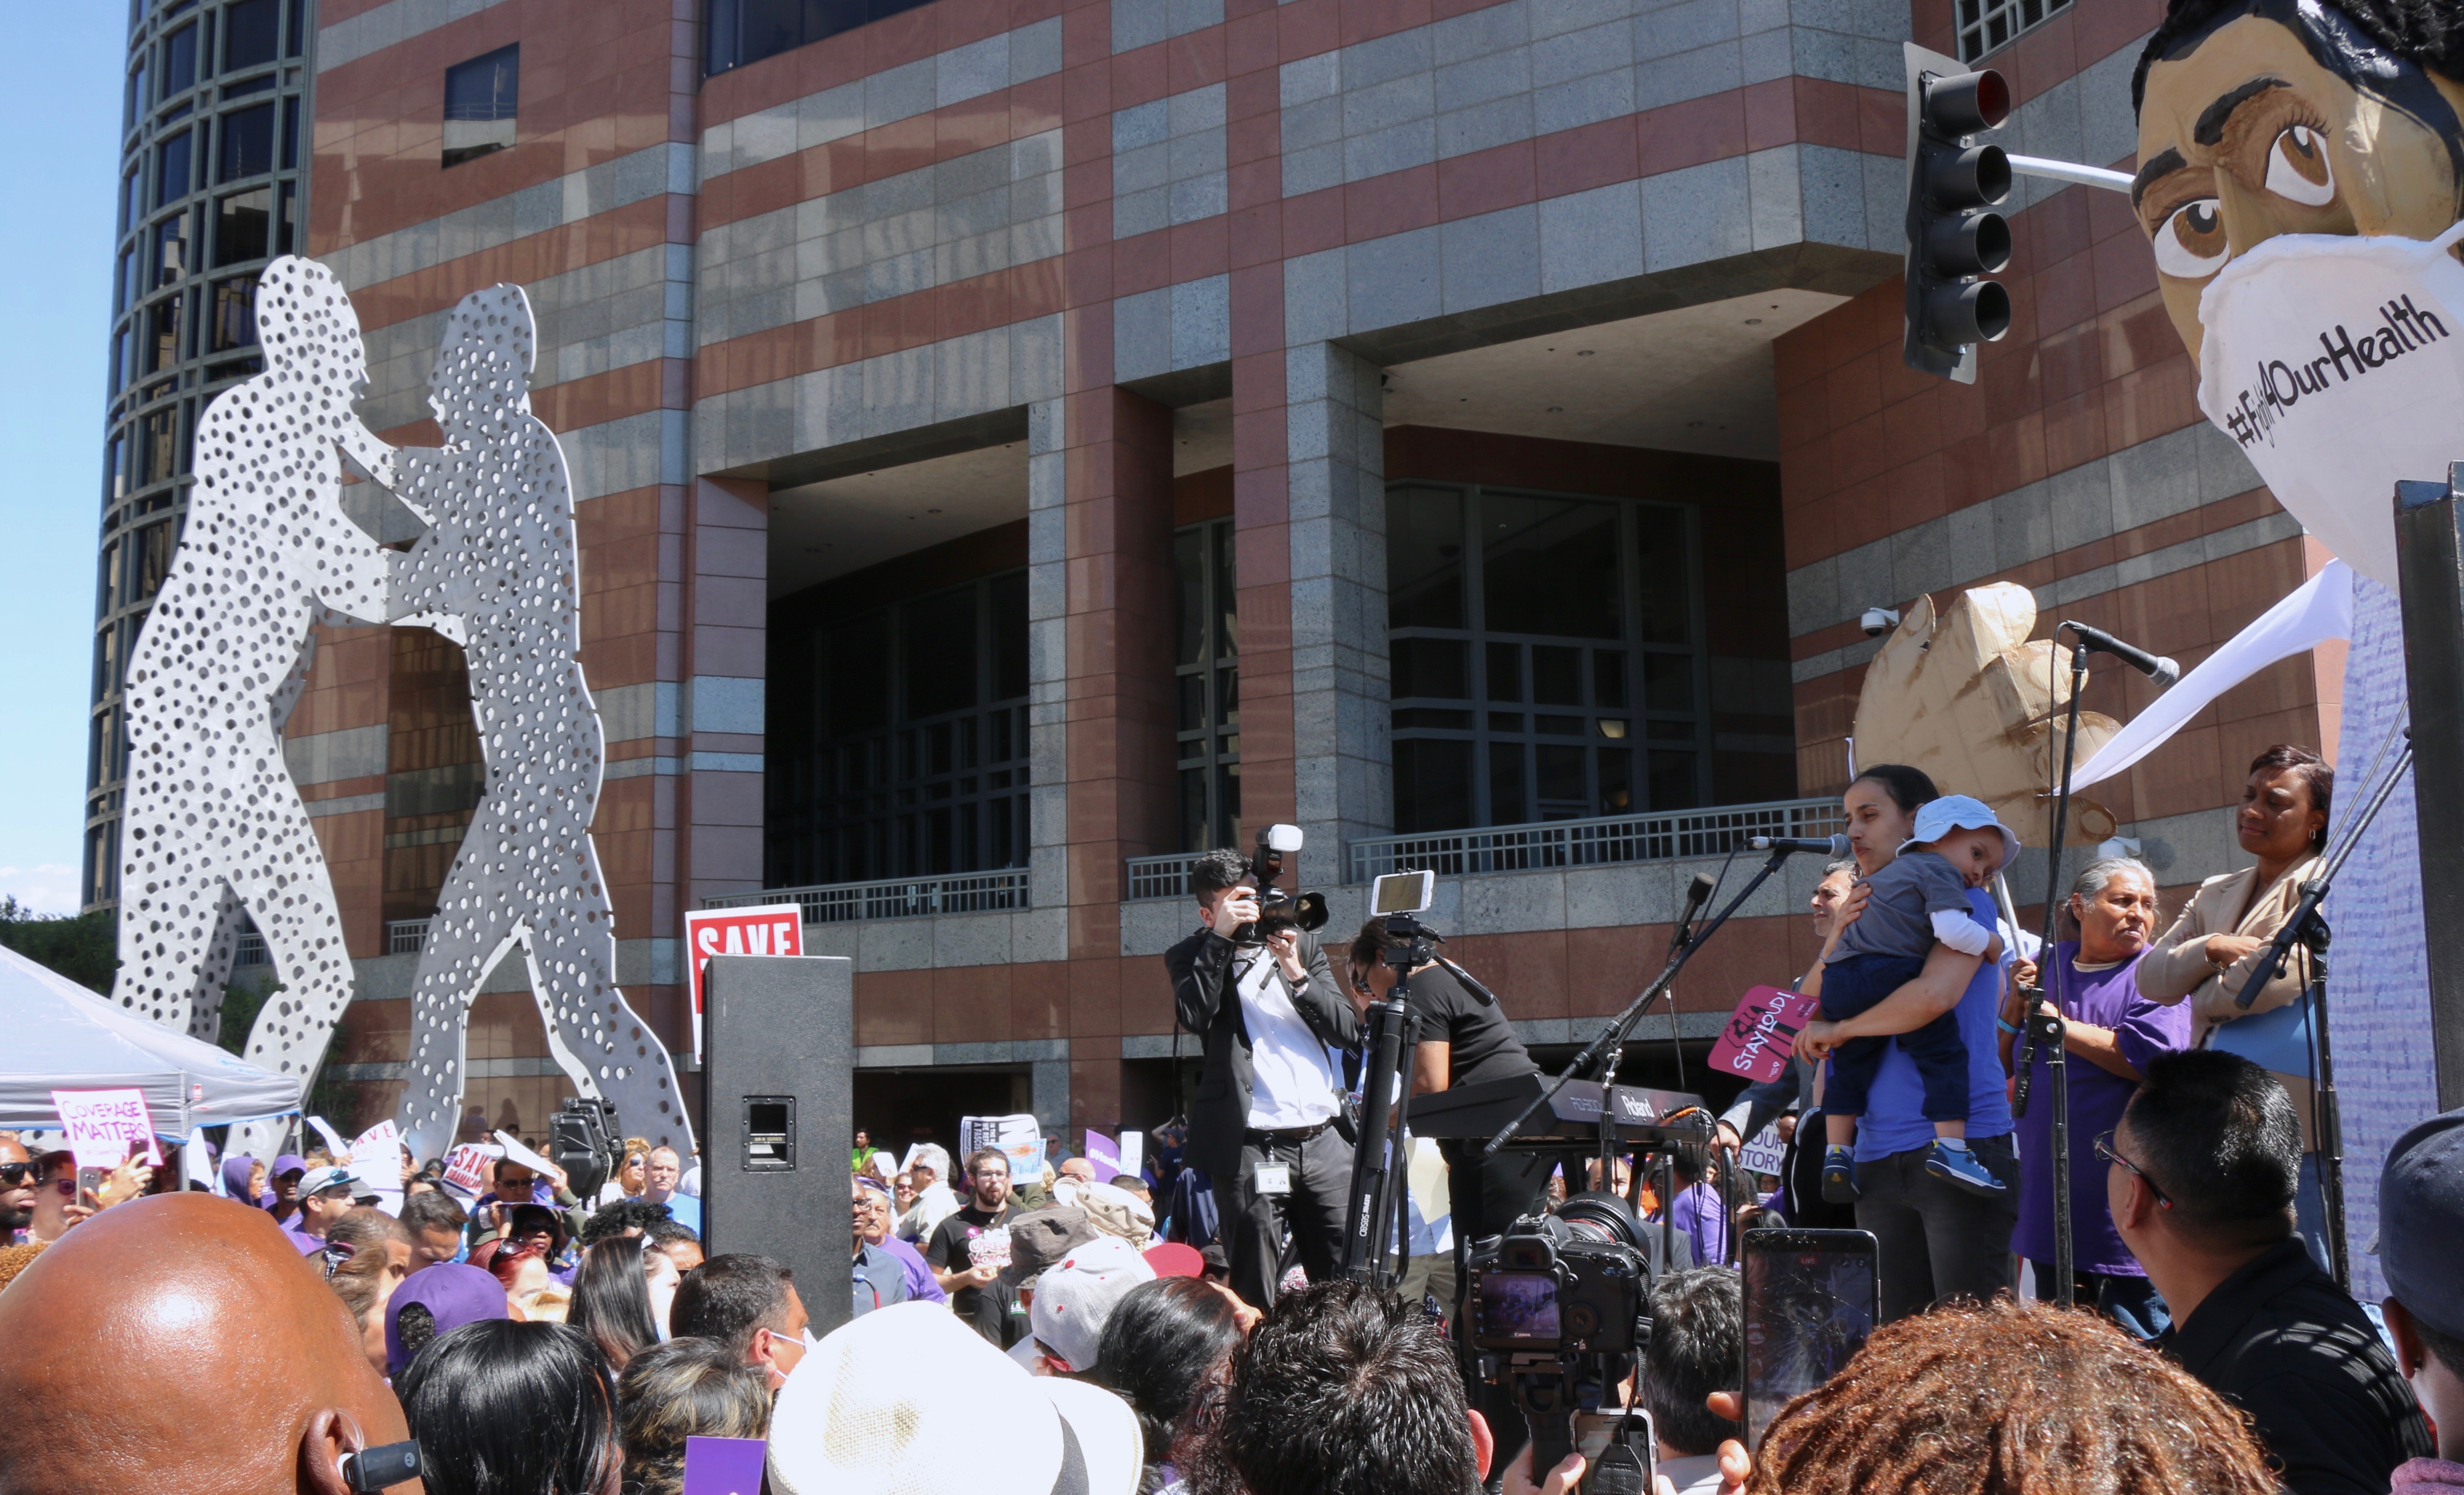 A mother helped by local Community Health Centers shares her story at the Save the Affordable Care Act march in Downtown Los Angeles, while Jonathan Borofsky's "Molecule Man" statue fights on.